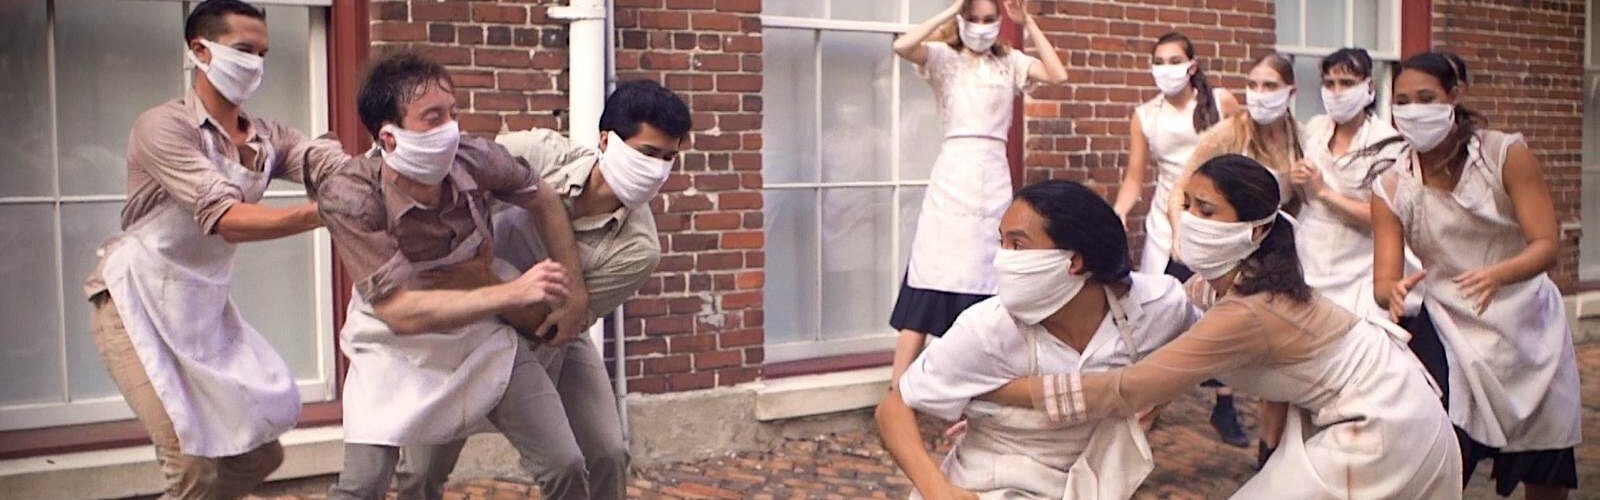 A scene from Tampa City Ballet's first short film, "102 Degrees," based on the 1918 Spanish Flu outbreak in Ybor's cigar factory worker community.